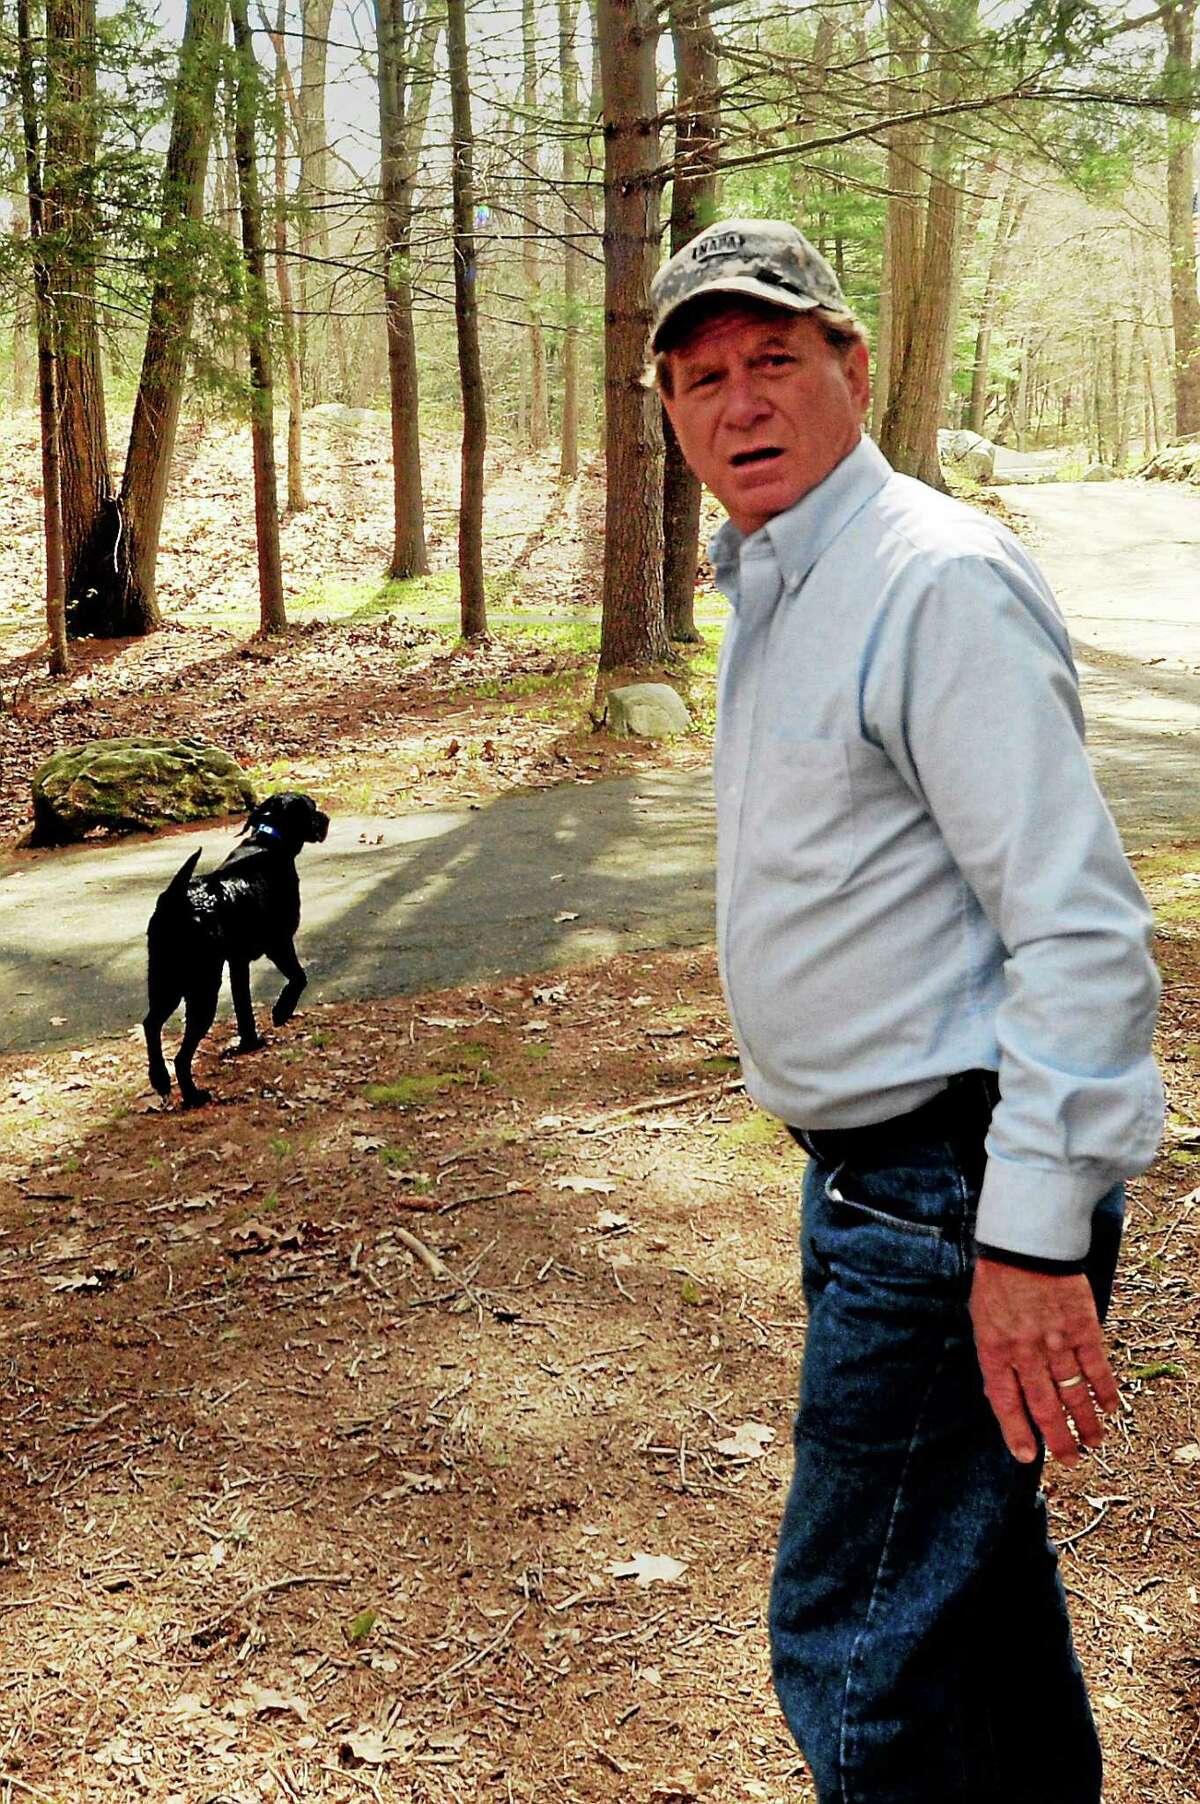 Bill Smolinski Sr., of Cheshire, searches in the Valley woods in this photo taken in May. Cadaver dog is seen in background.